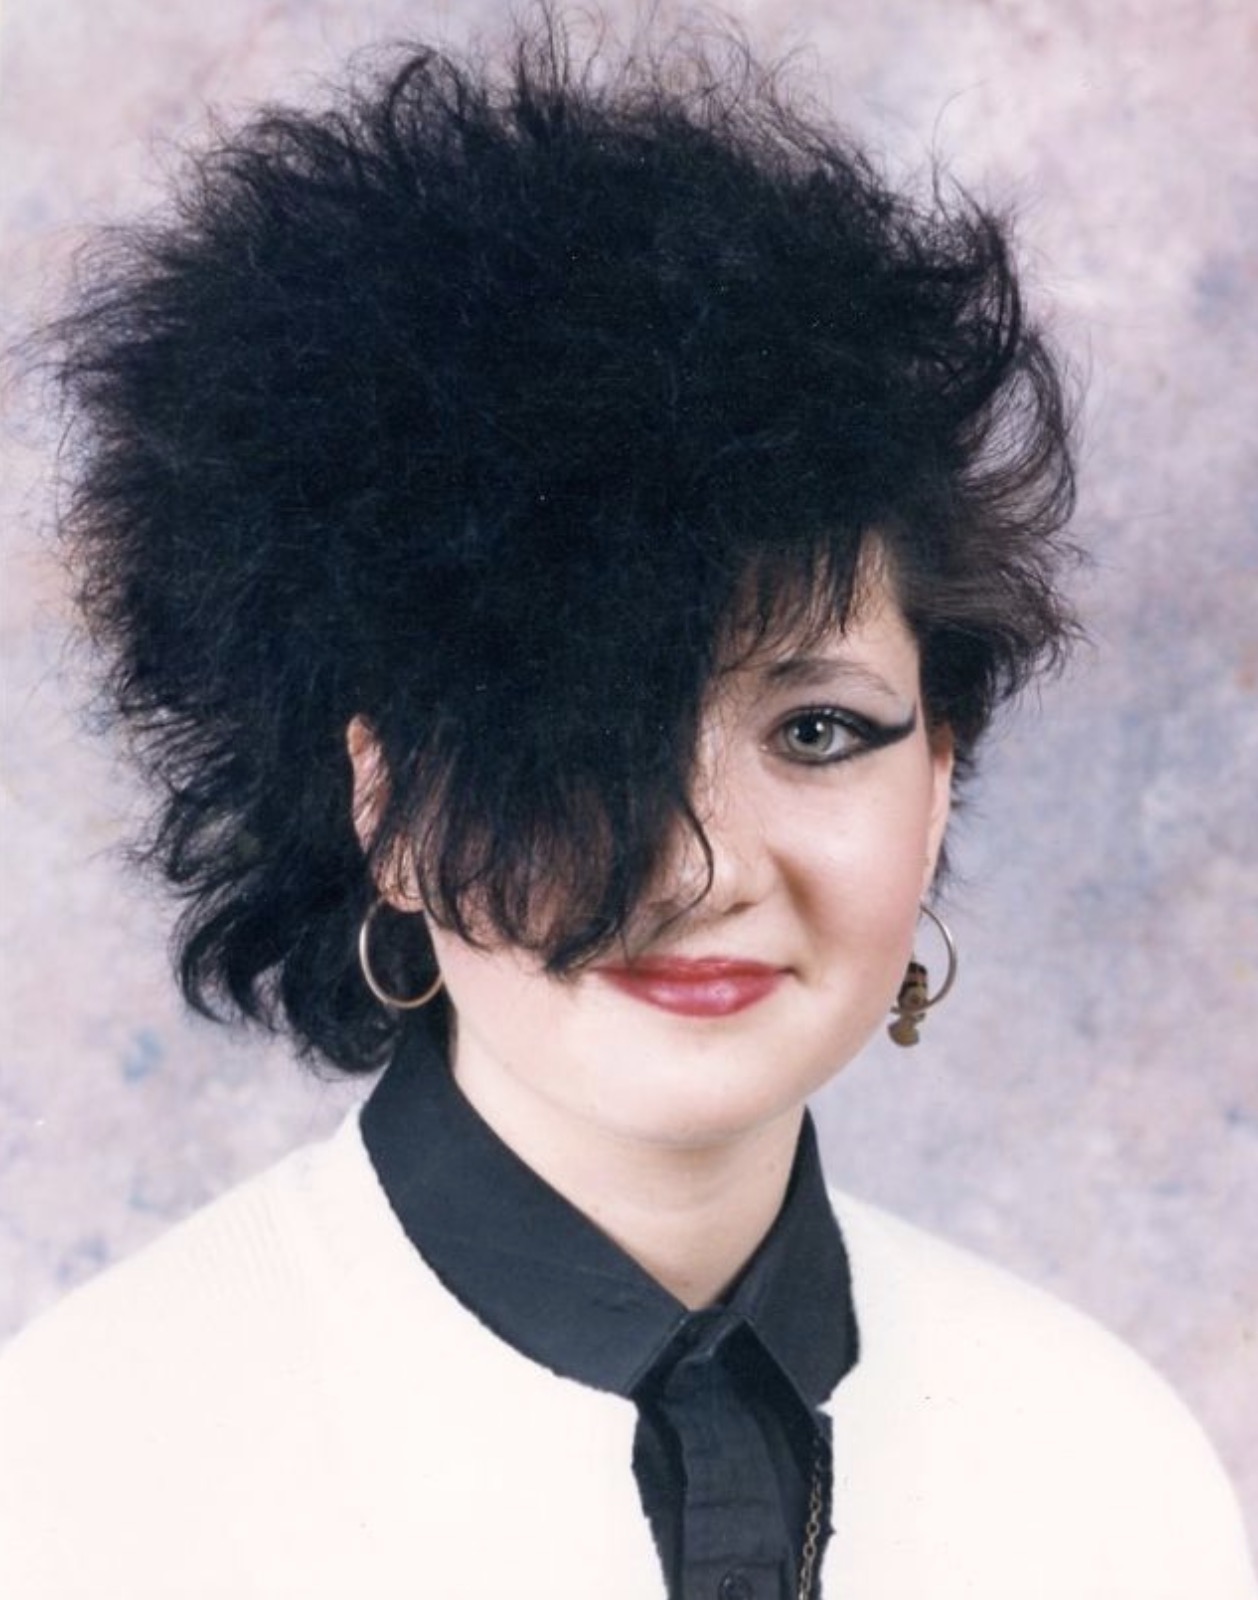 15 Hairstyles That'll Make You Glad The 80's Are Over